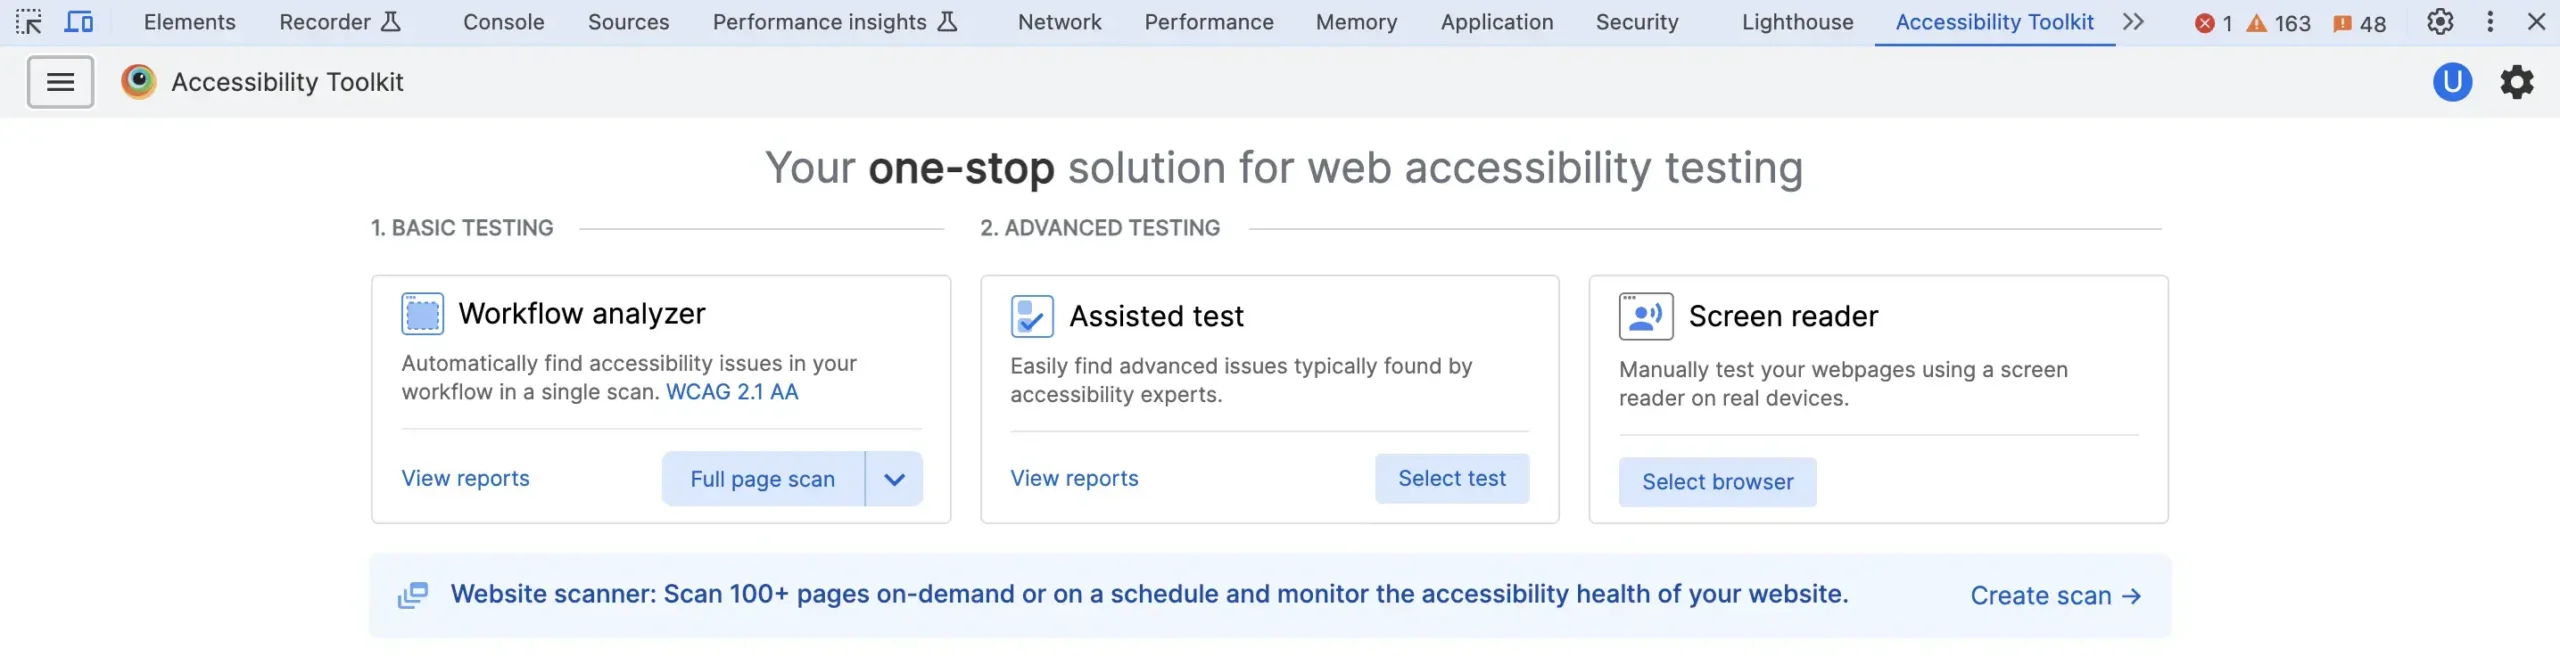 BrowserStack Accessibility Toolkit DevTools scaled